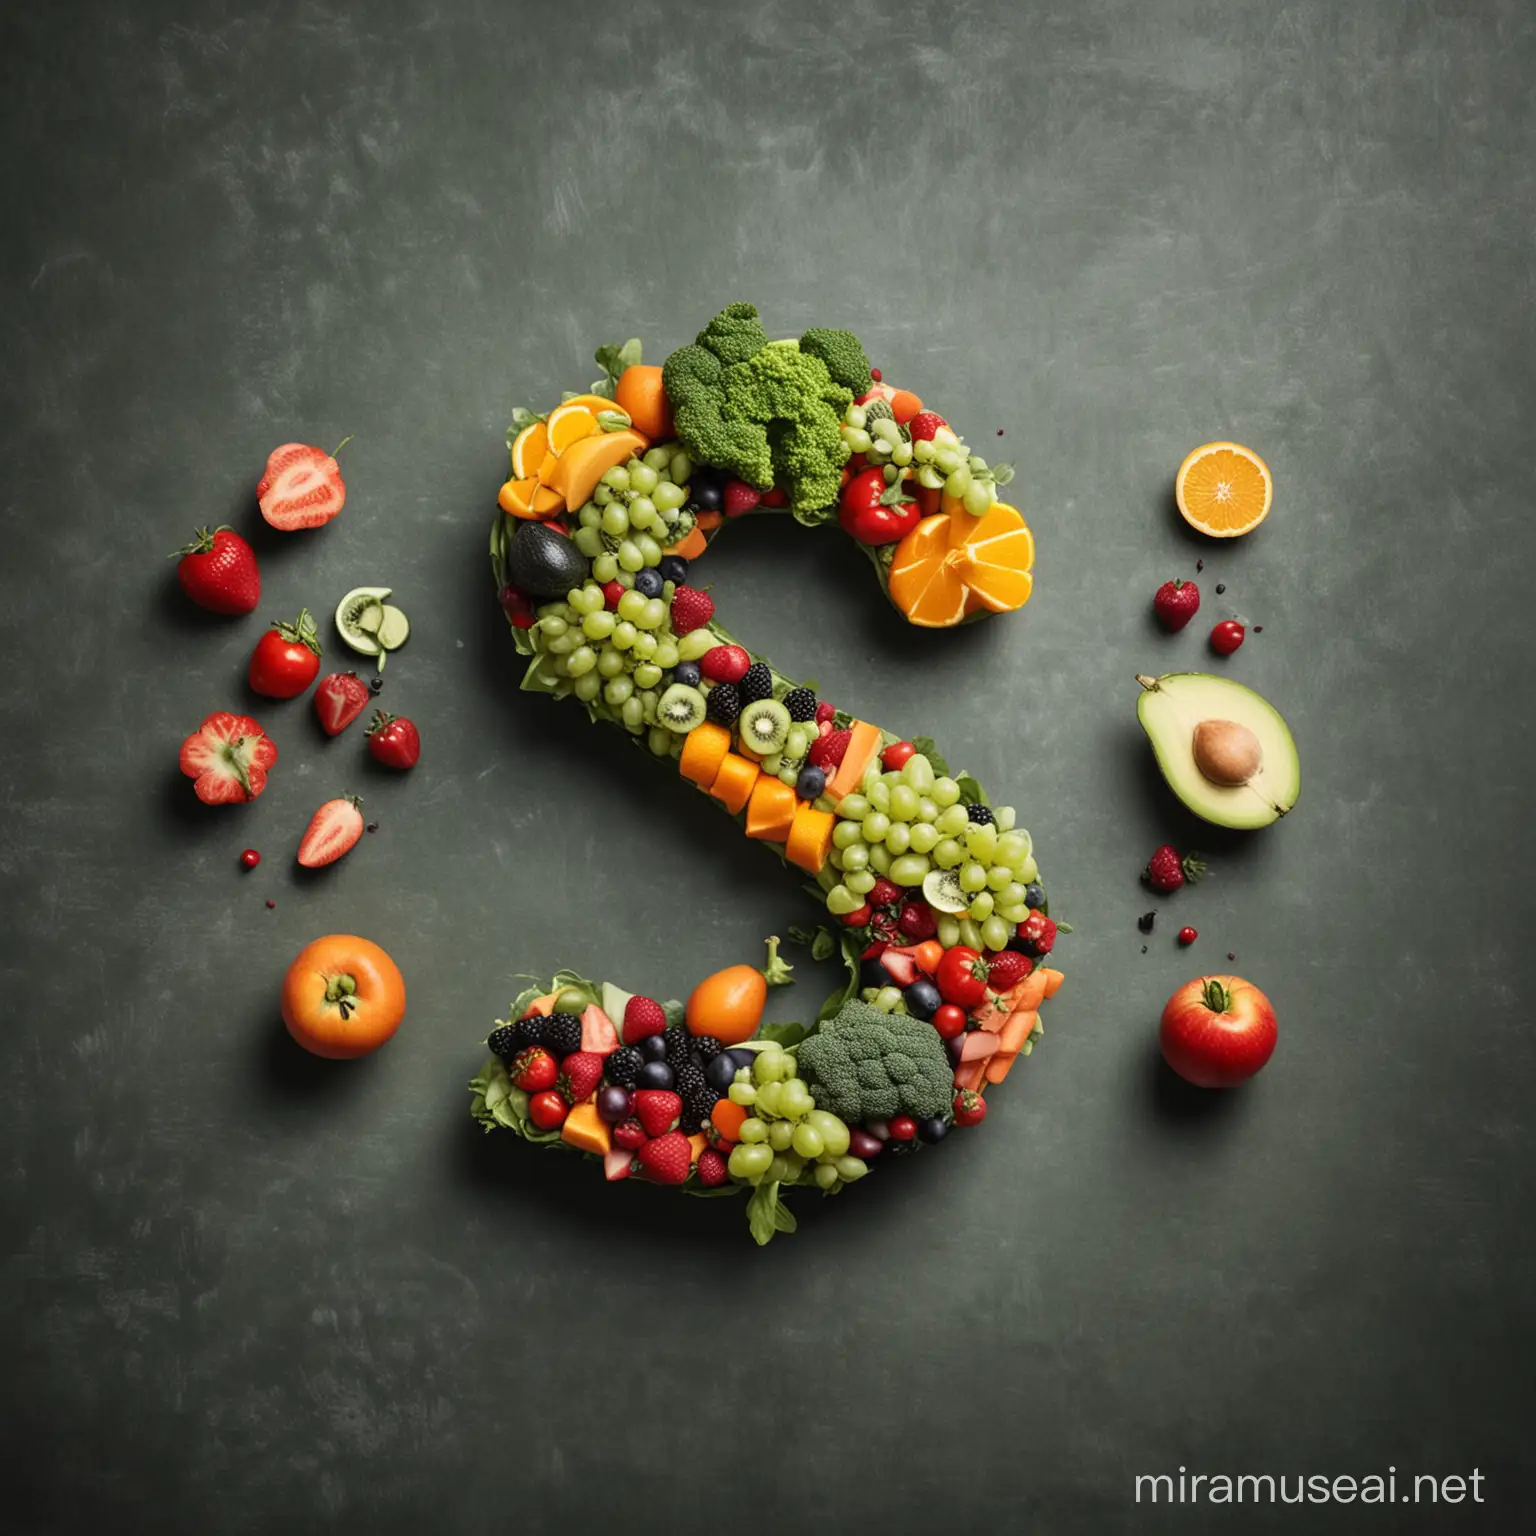 Colorful Fruits and Vegetables with Question Mark in Between